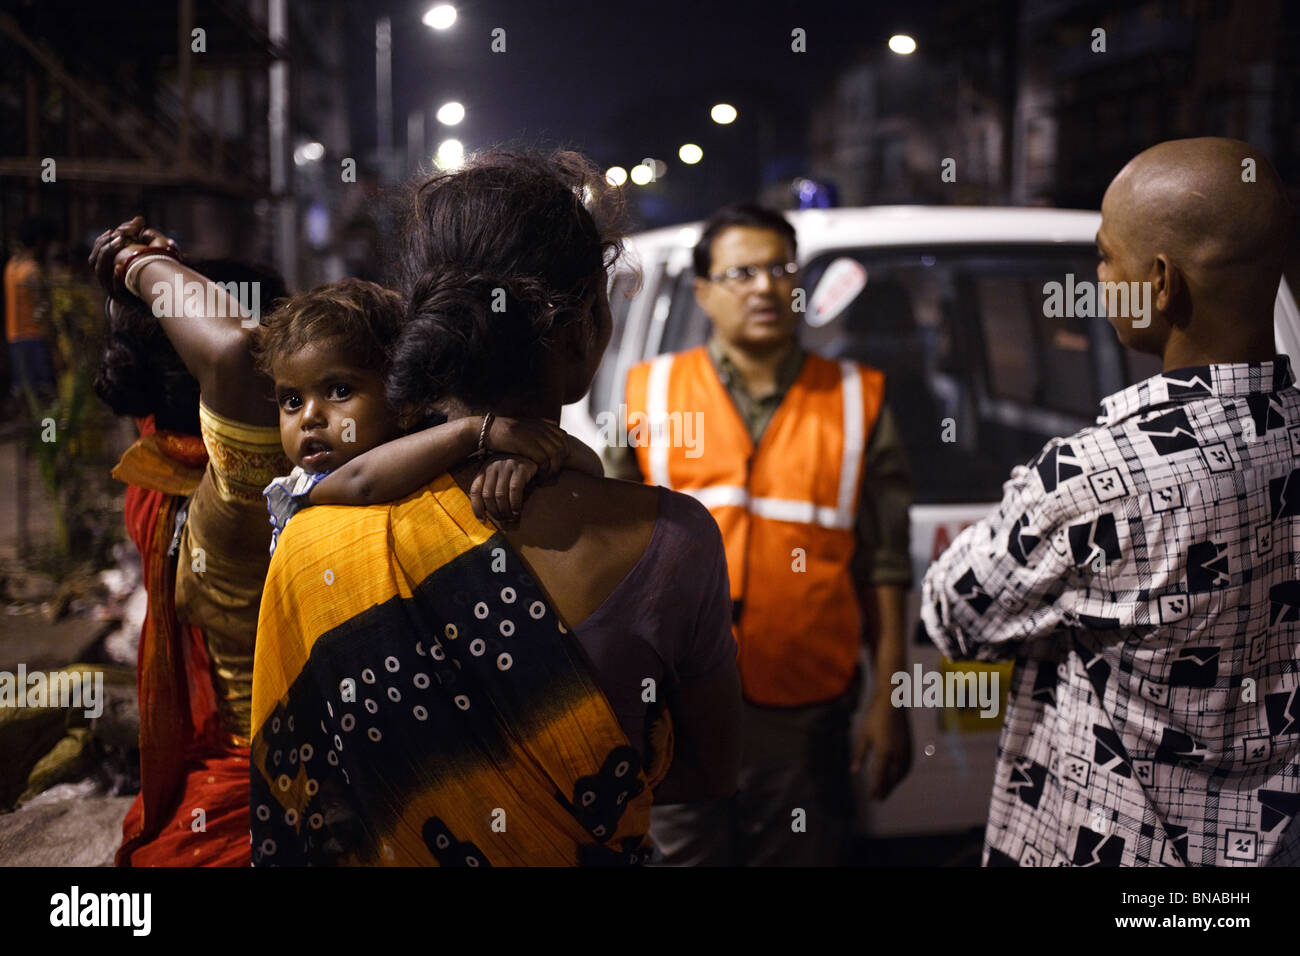 A night patrol run by a foreign NGO to help poor people in the streets of Kolkata, India Stock Photo